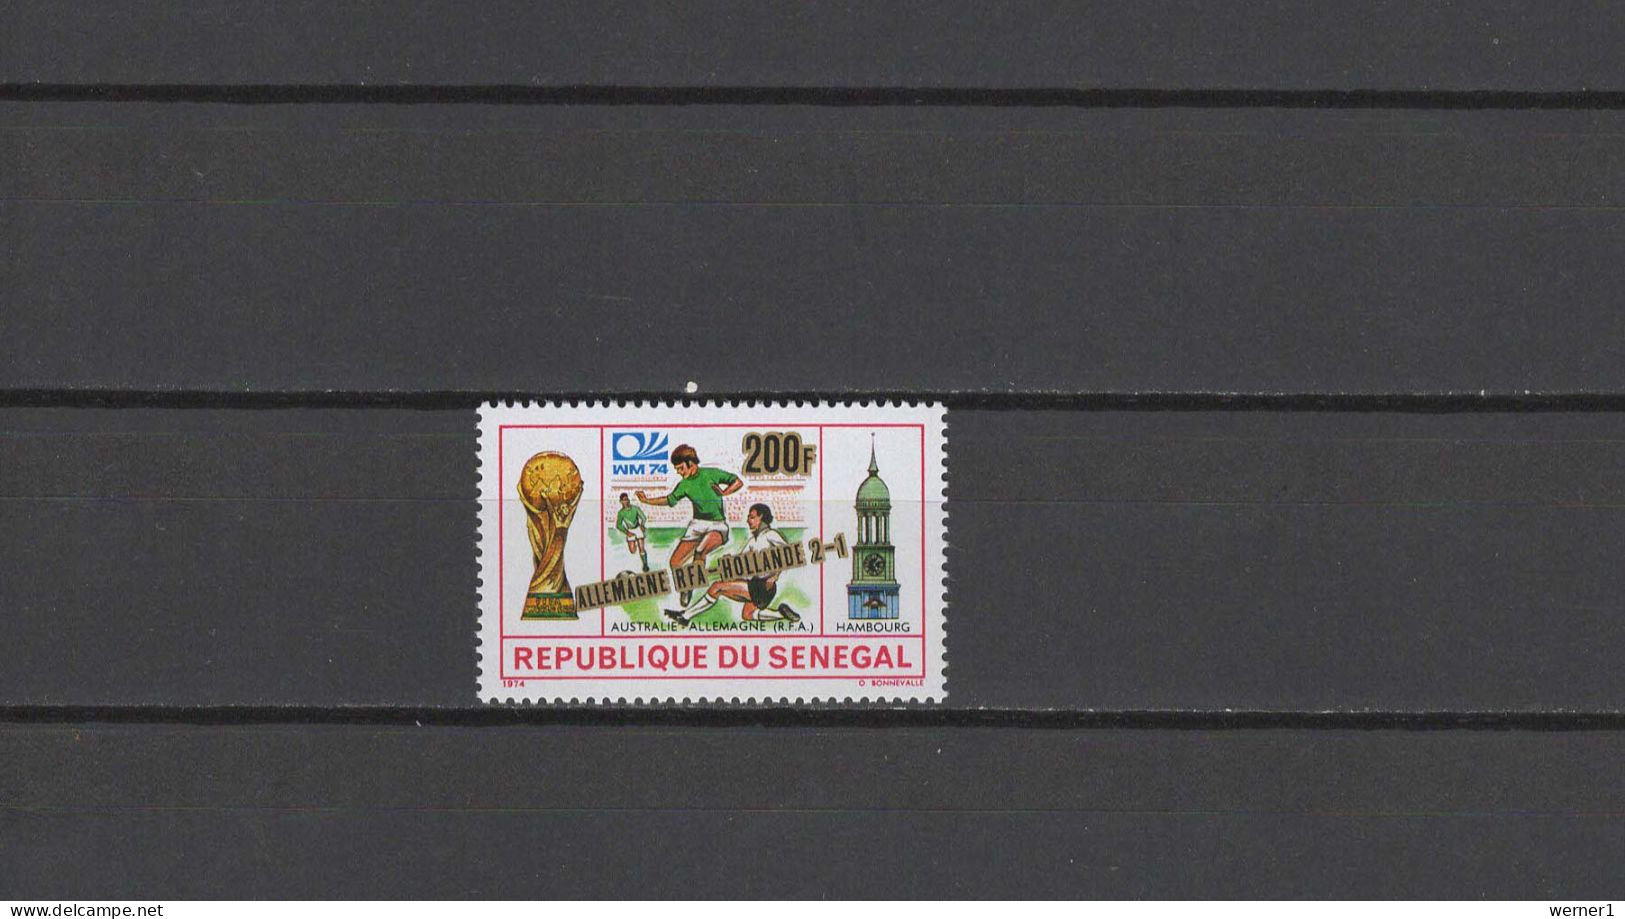 Senegal 1975 Football Soccer World Cup Stamp With Winner Overprint MNH - 1974 – Alemania Occidental